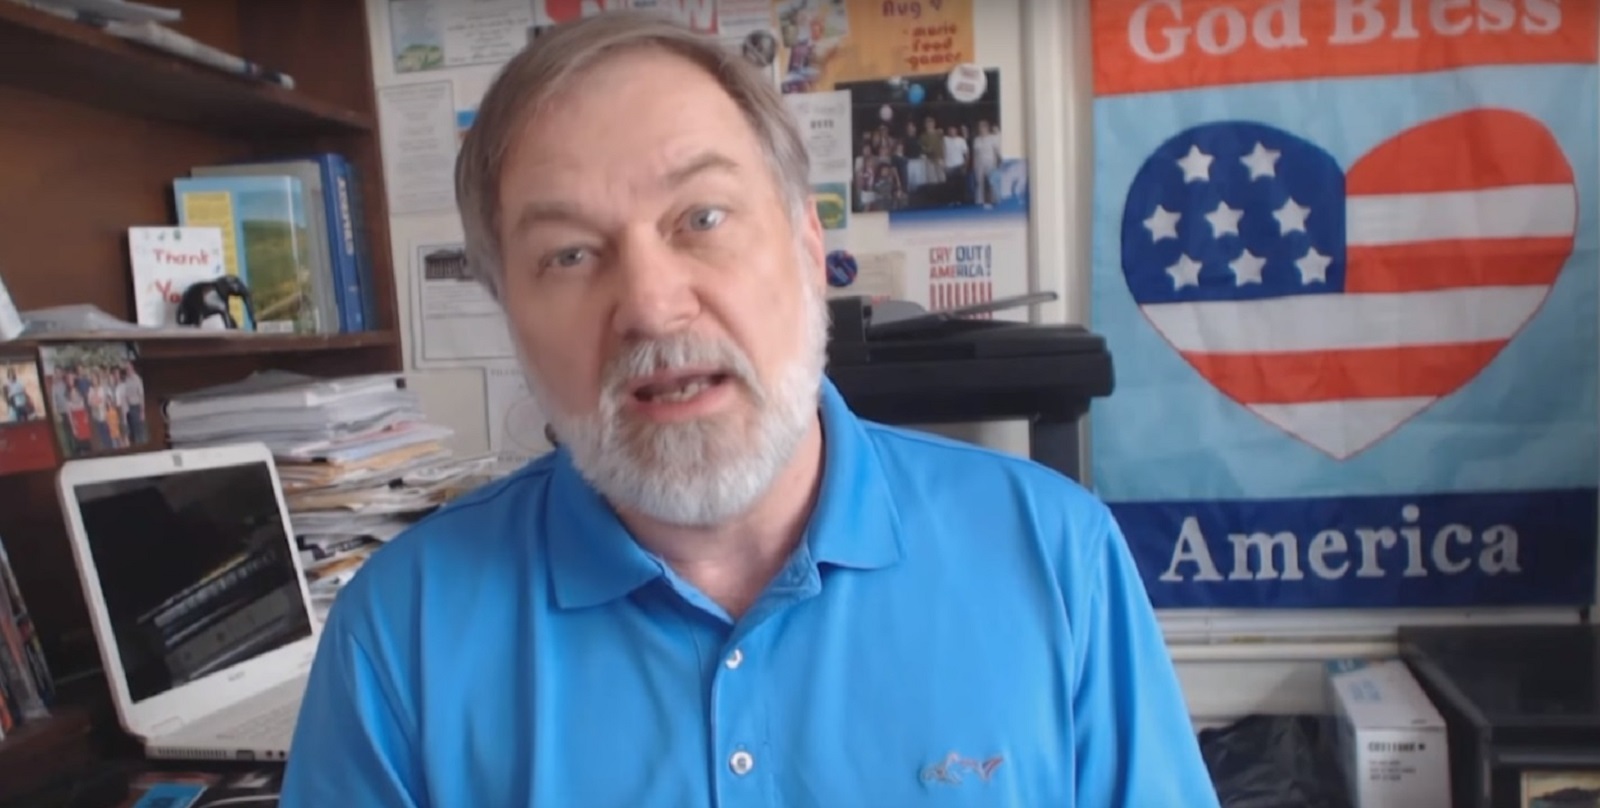 Republican activist Scott Lively has claimed that God removed Donald Trump from office because he was too accepting of homosexuality.